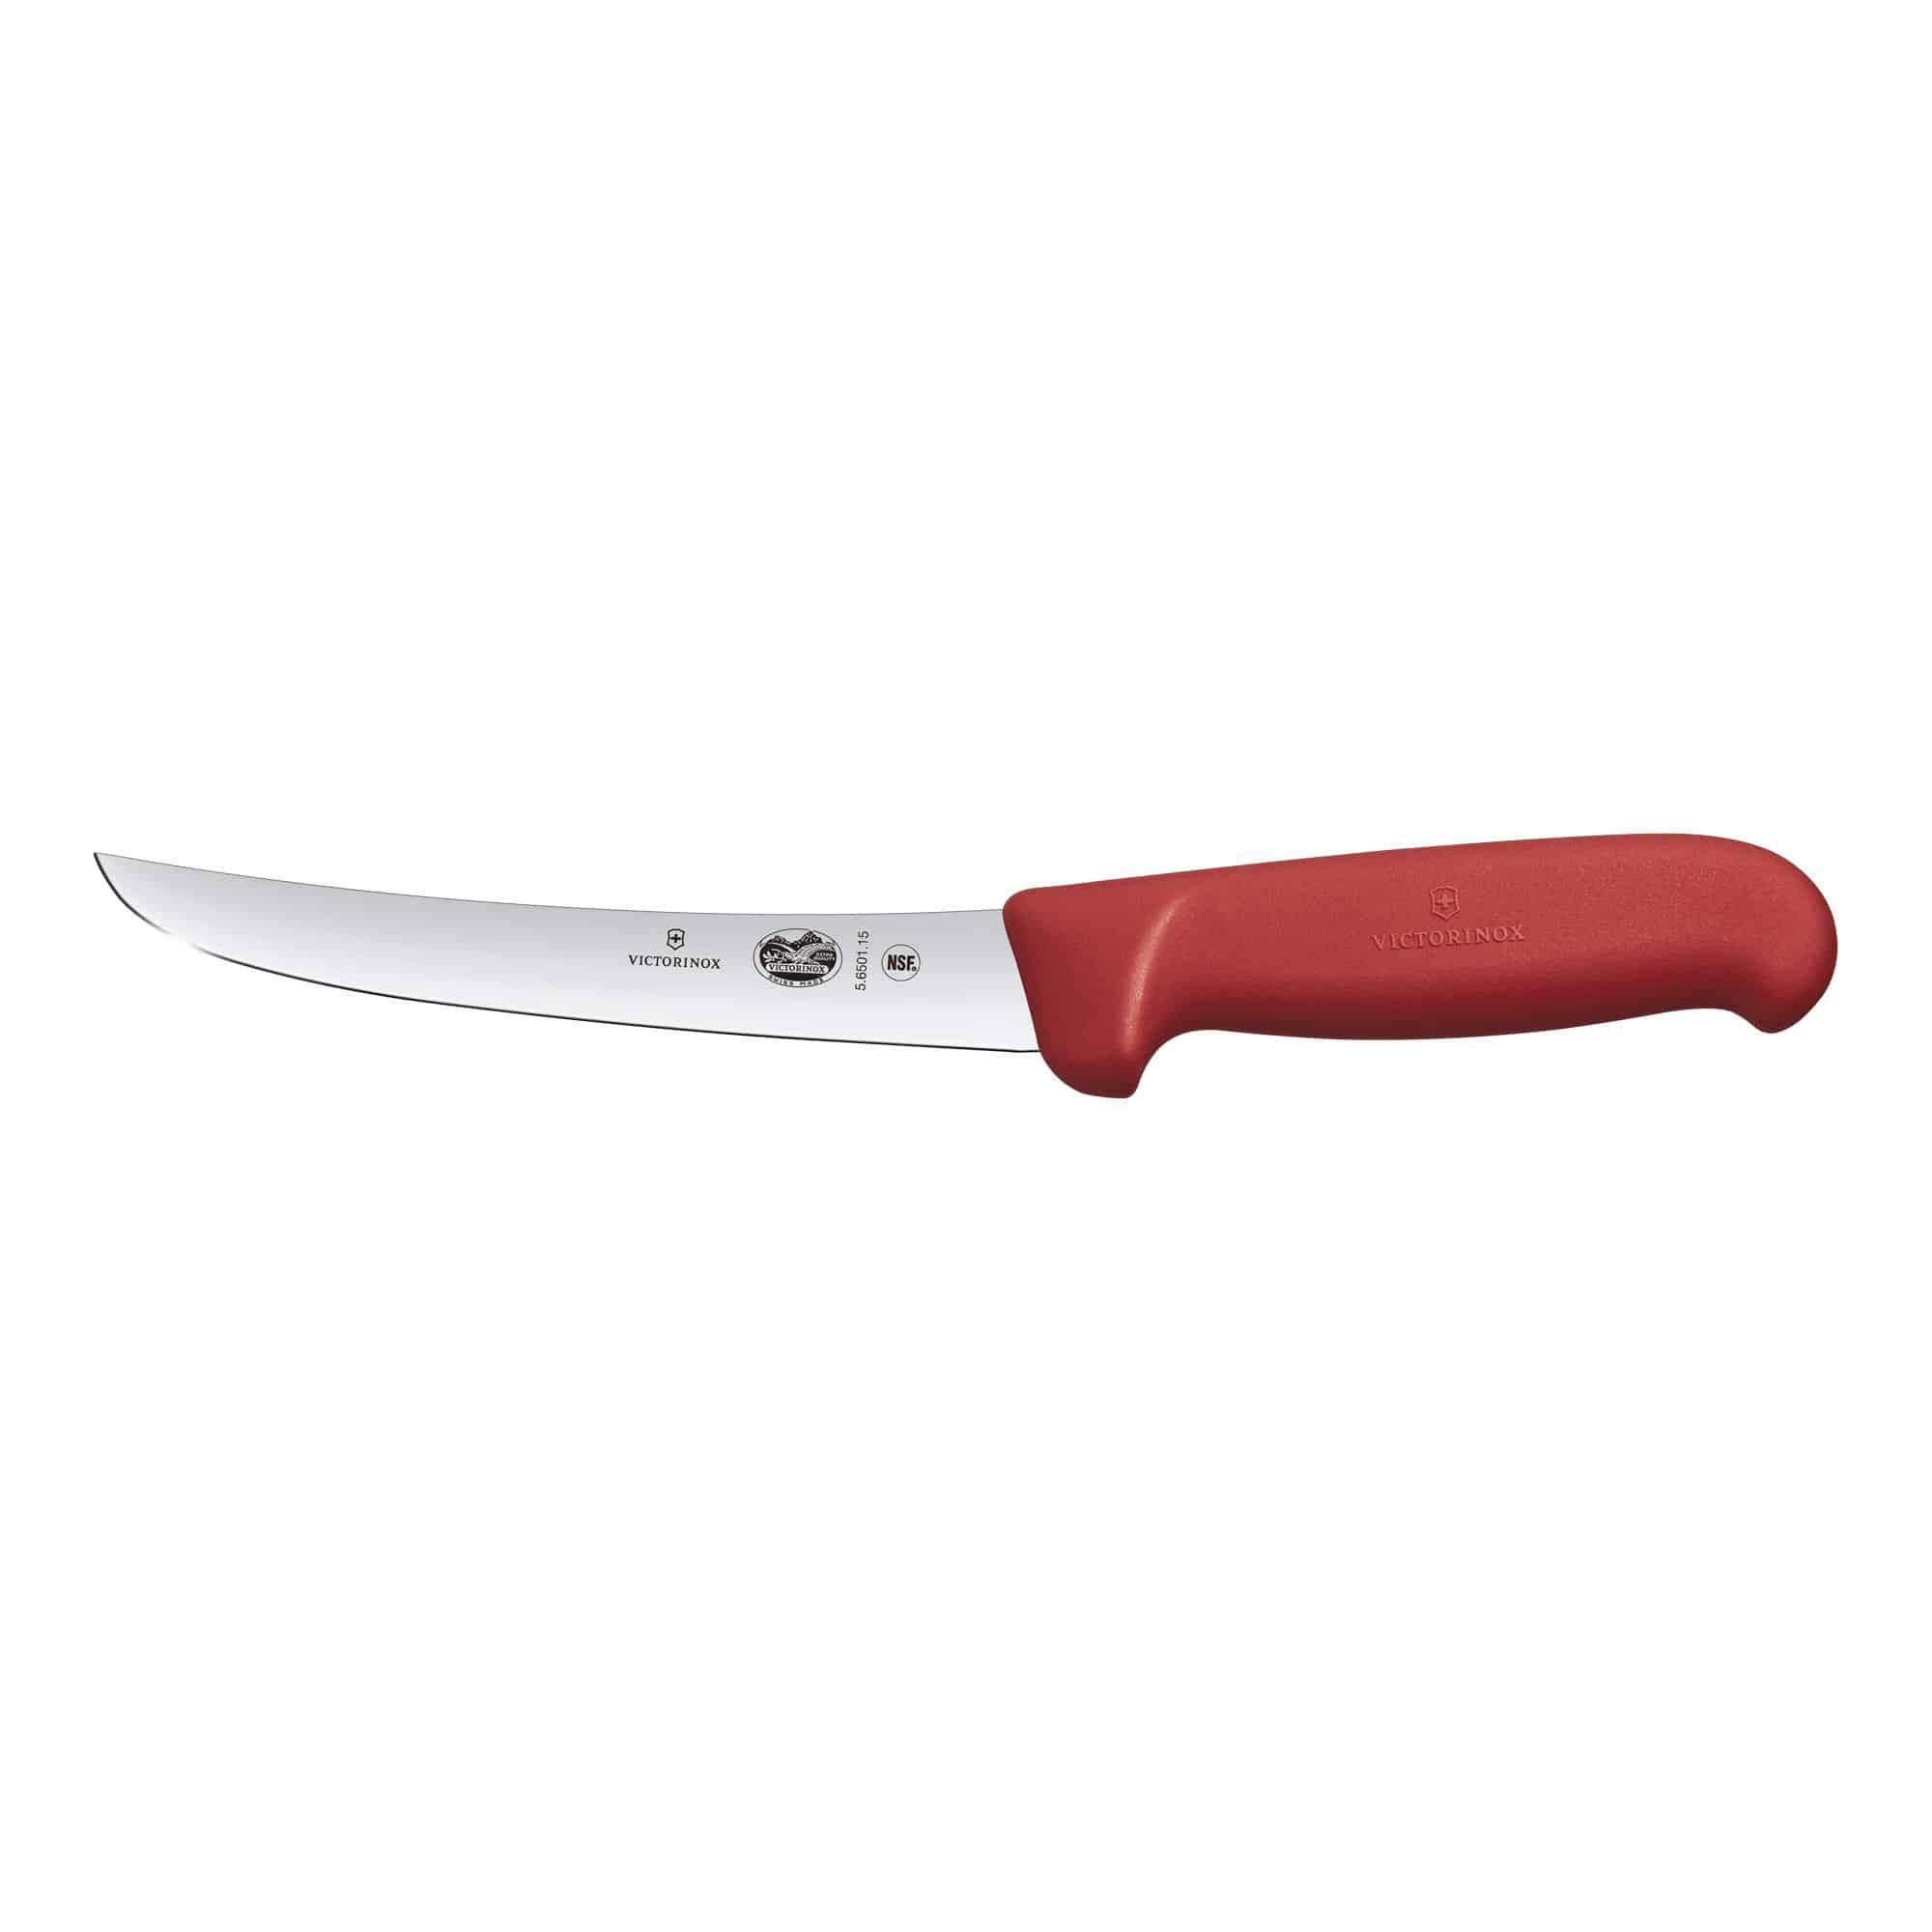 Victorinox Boning Knife, 15cm Curved and Wide Blade, with Red Handle